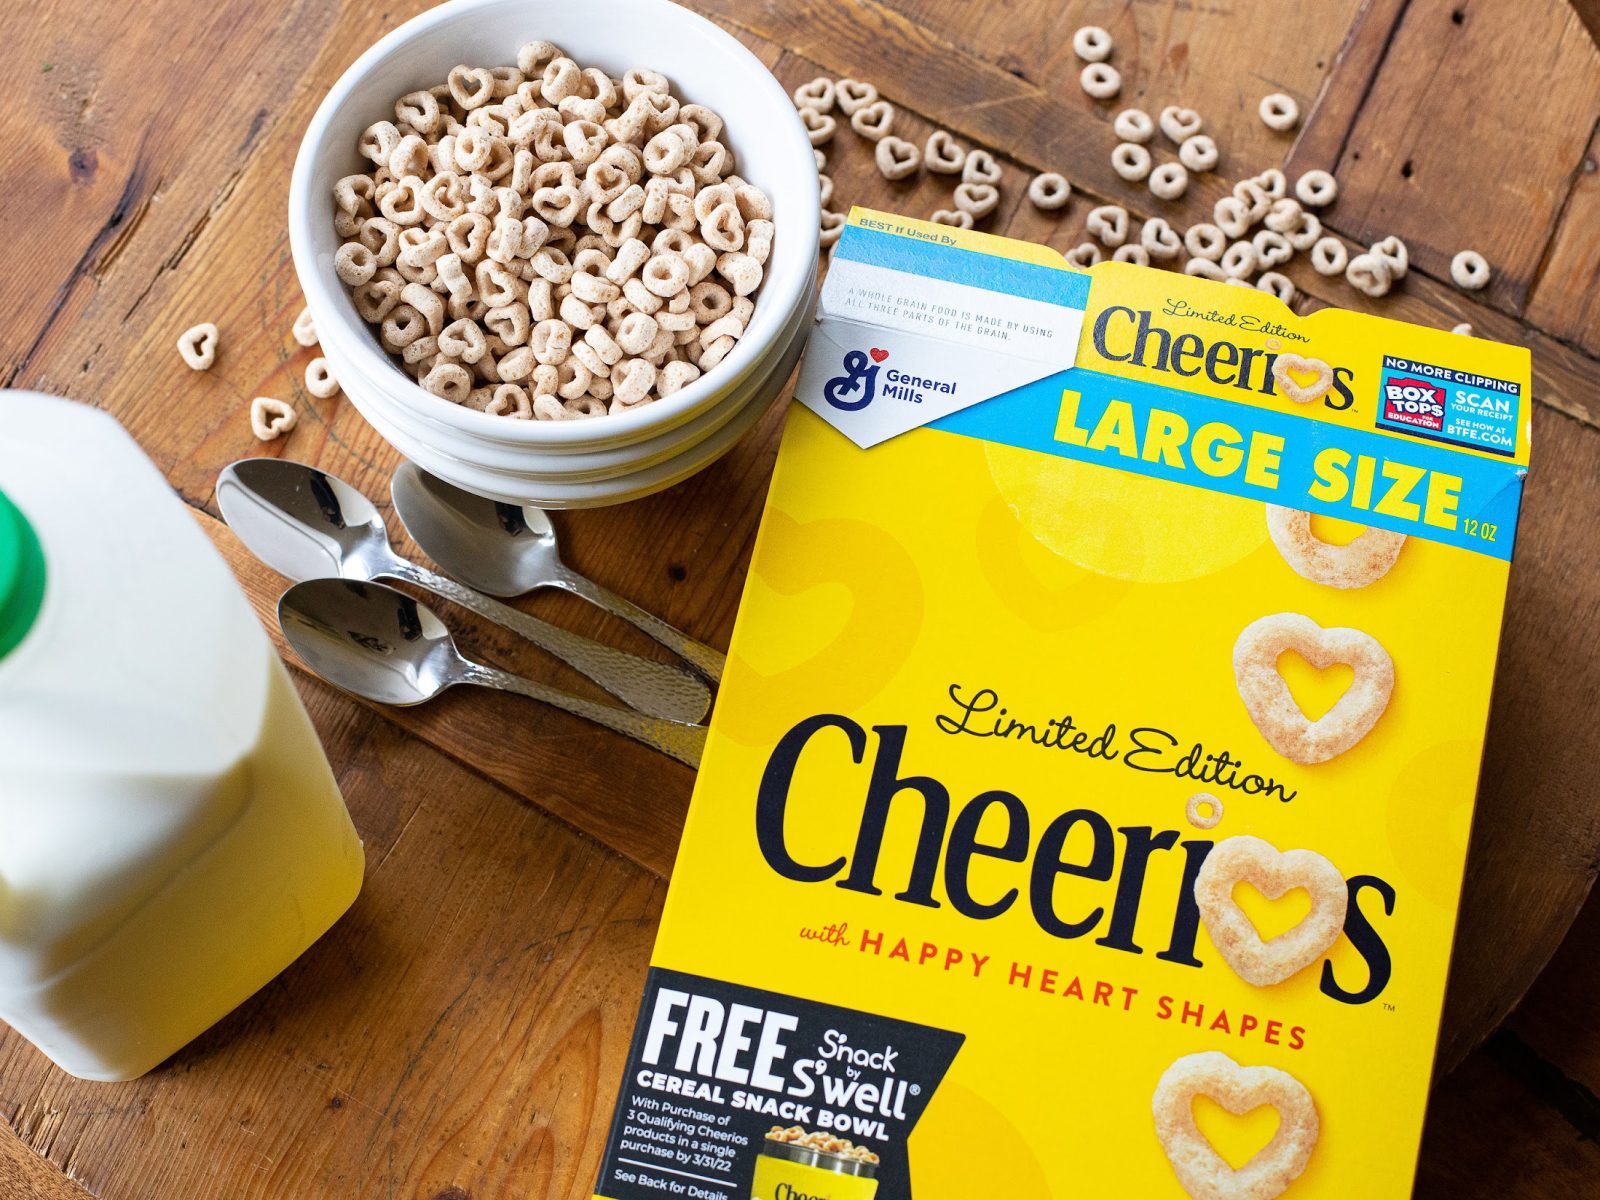 Get The Big Boxes Of General Mills Cheerios Cereal As Low As $3.10 At Publix